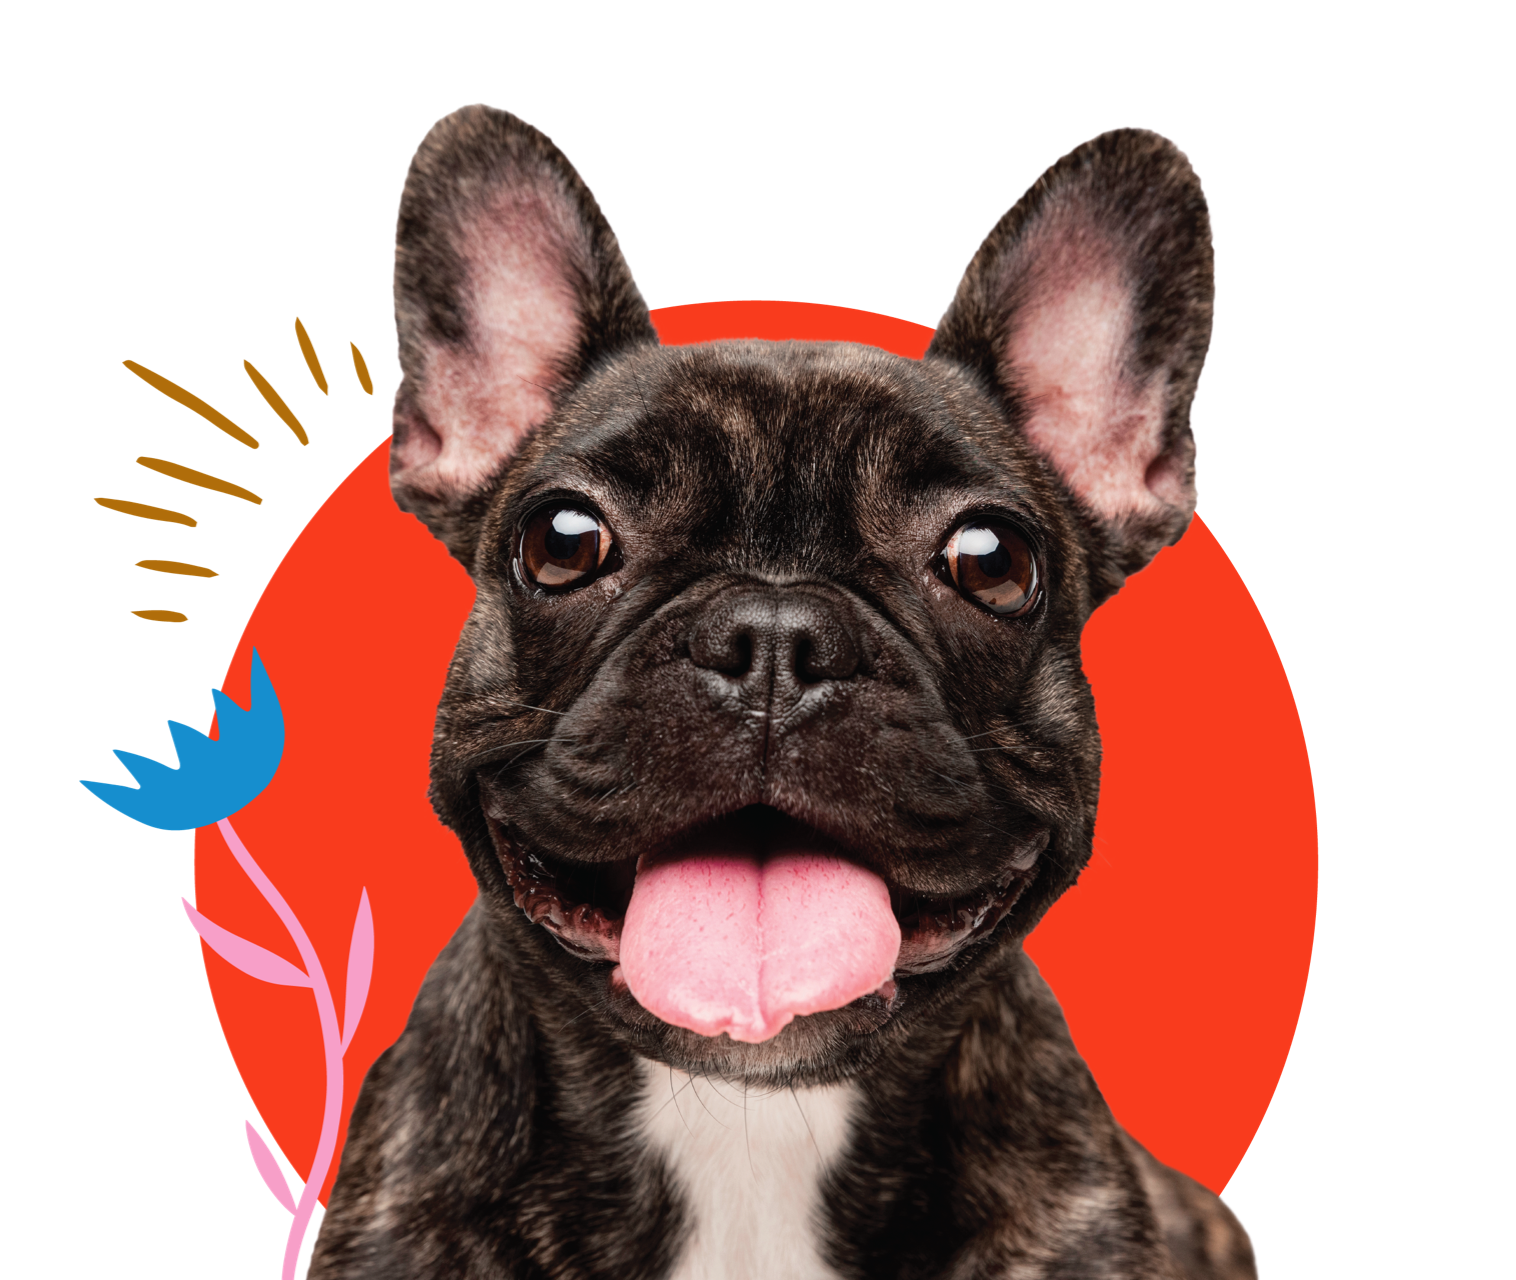 Snubbies_Dog_Supplements_Pet_Industry_branding_Strategy_Pet_Marketing_Visual_Identity_dog_with_tongue_out_and_illustrations